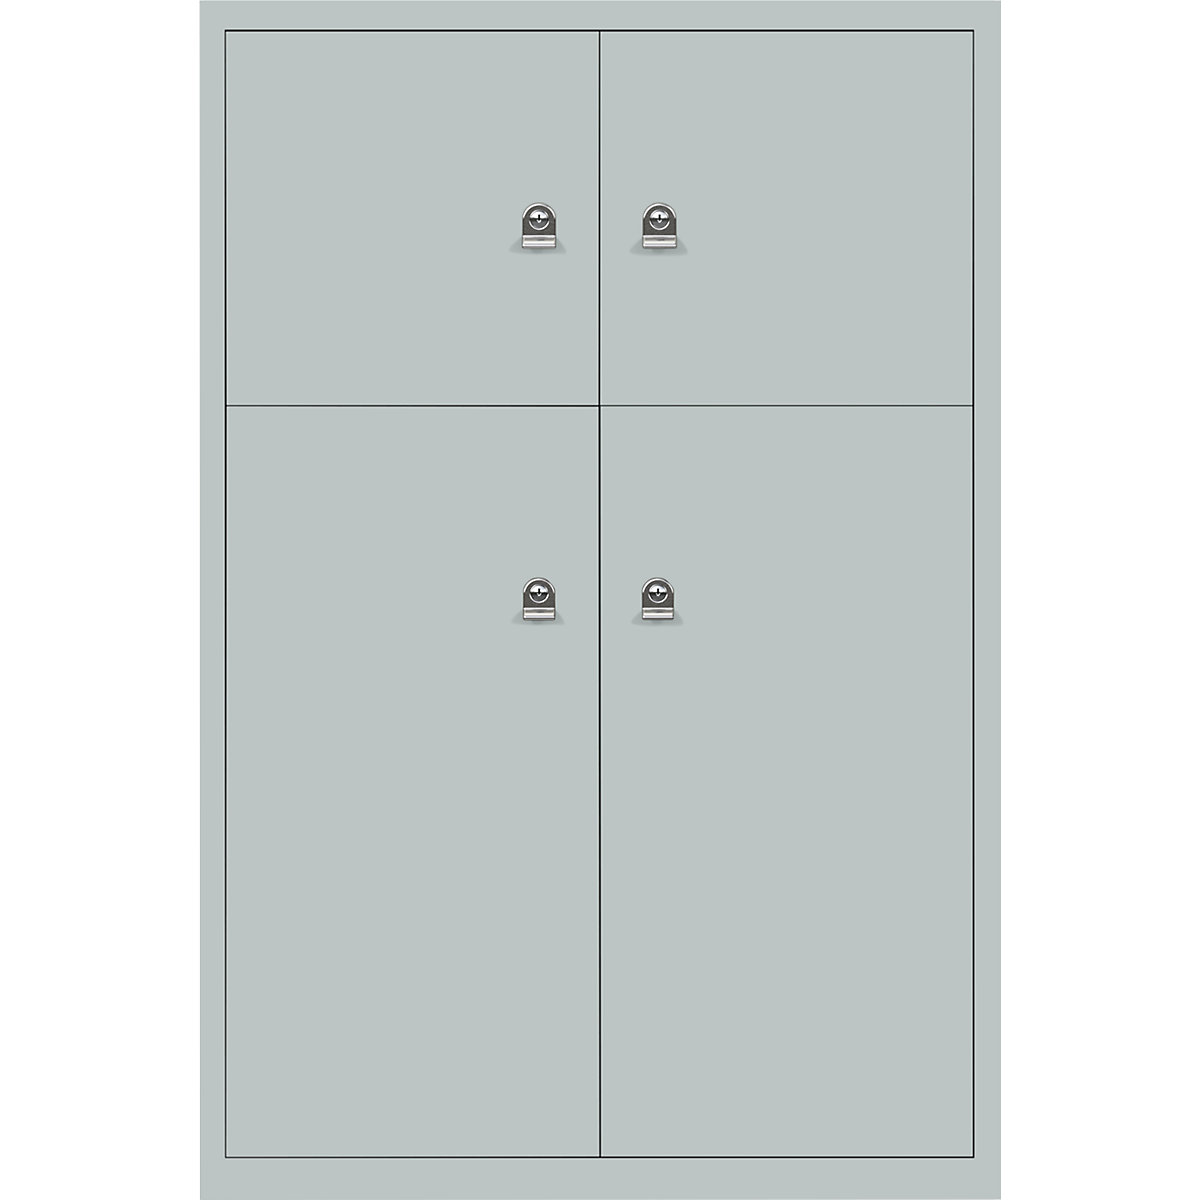 BISLEY – LateralFile™ lodge, with 4 lockable compartments, height 2 x 375 mm, 2 x 755 mm, silver